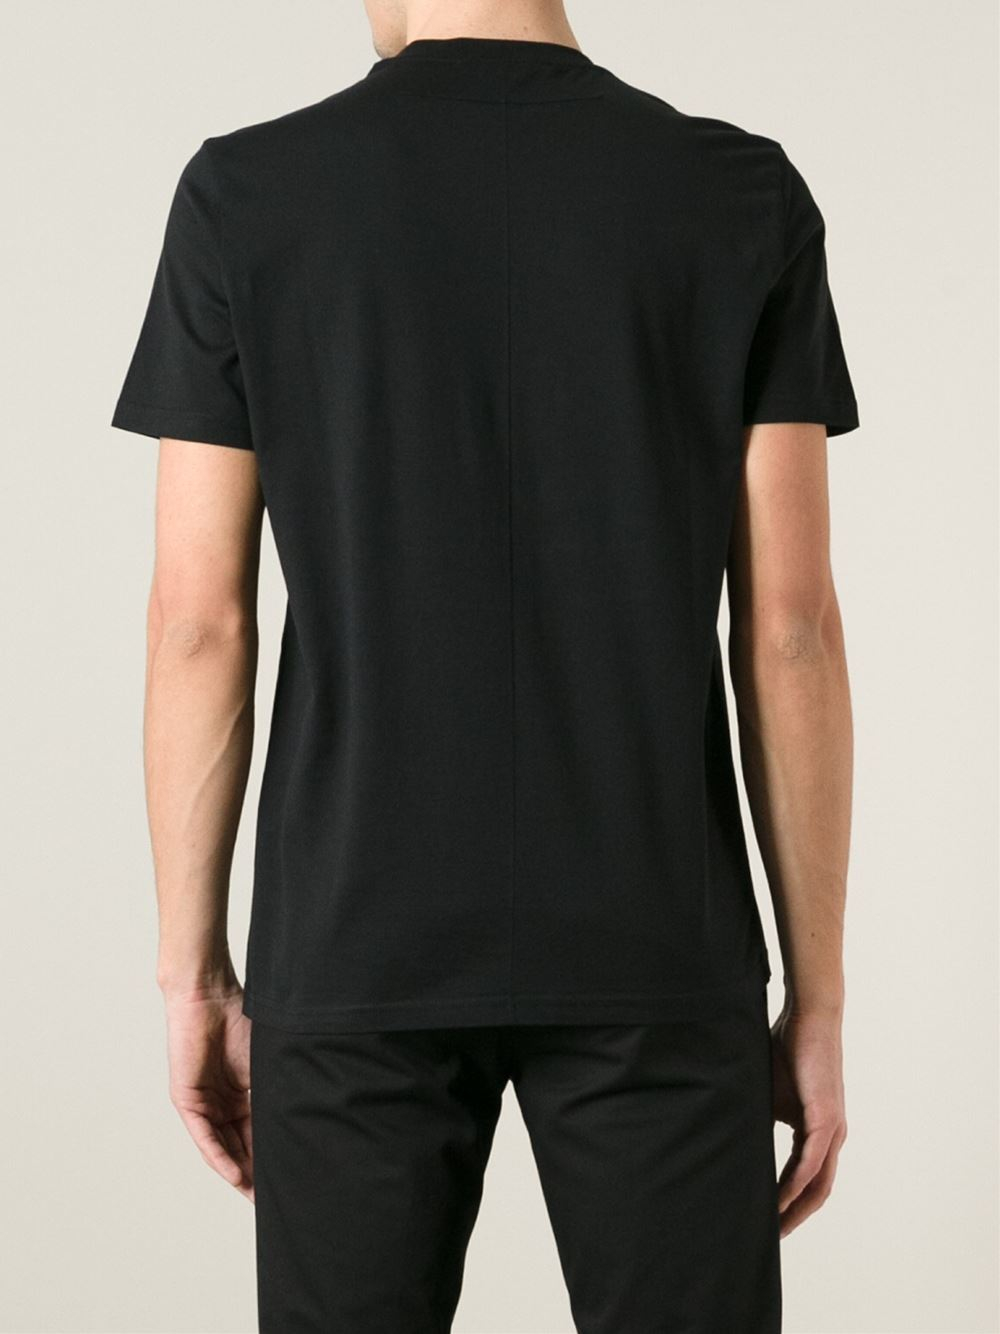 Givenchy Rottweiler Cotton T-Shirt in Black for Men - Lyst